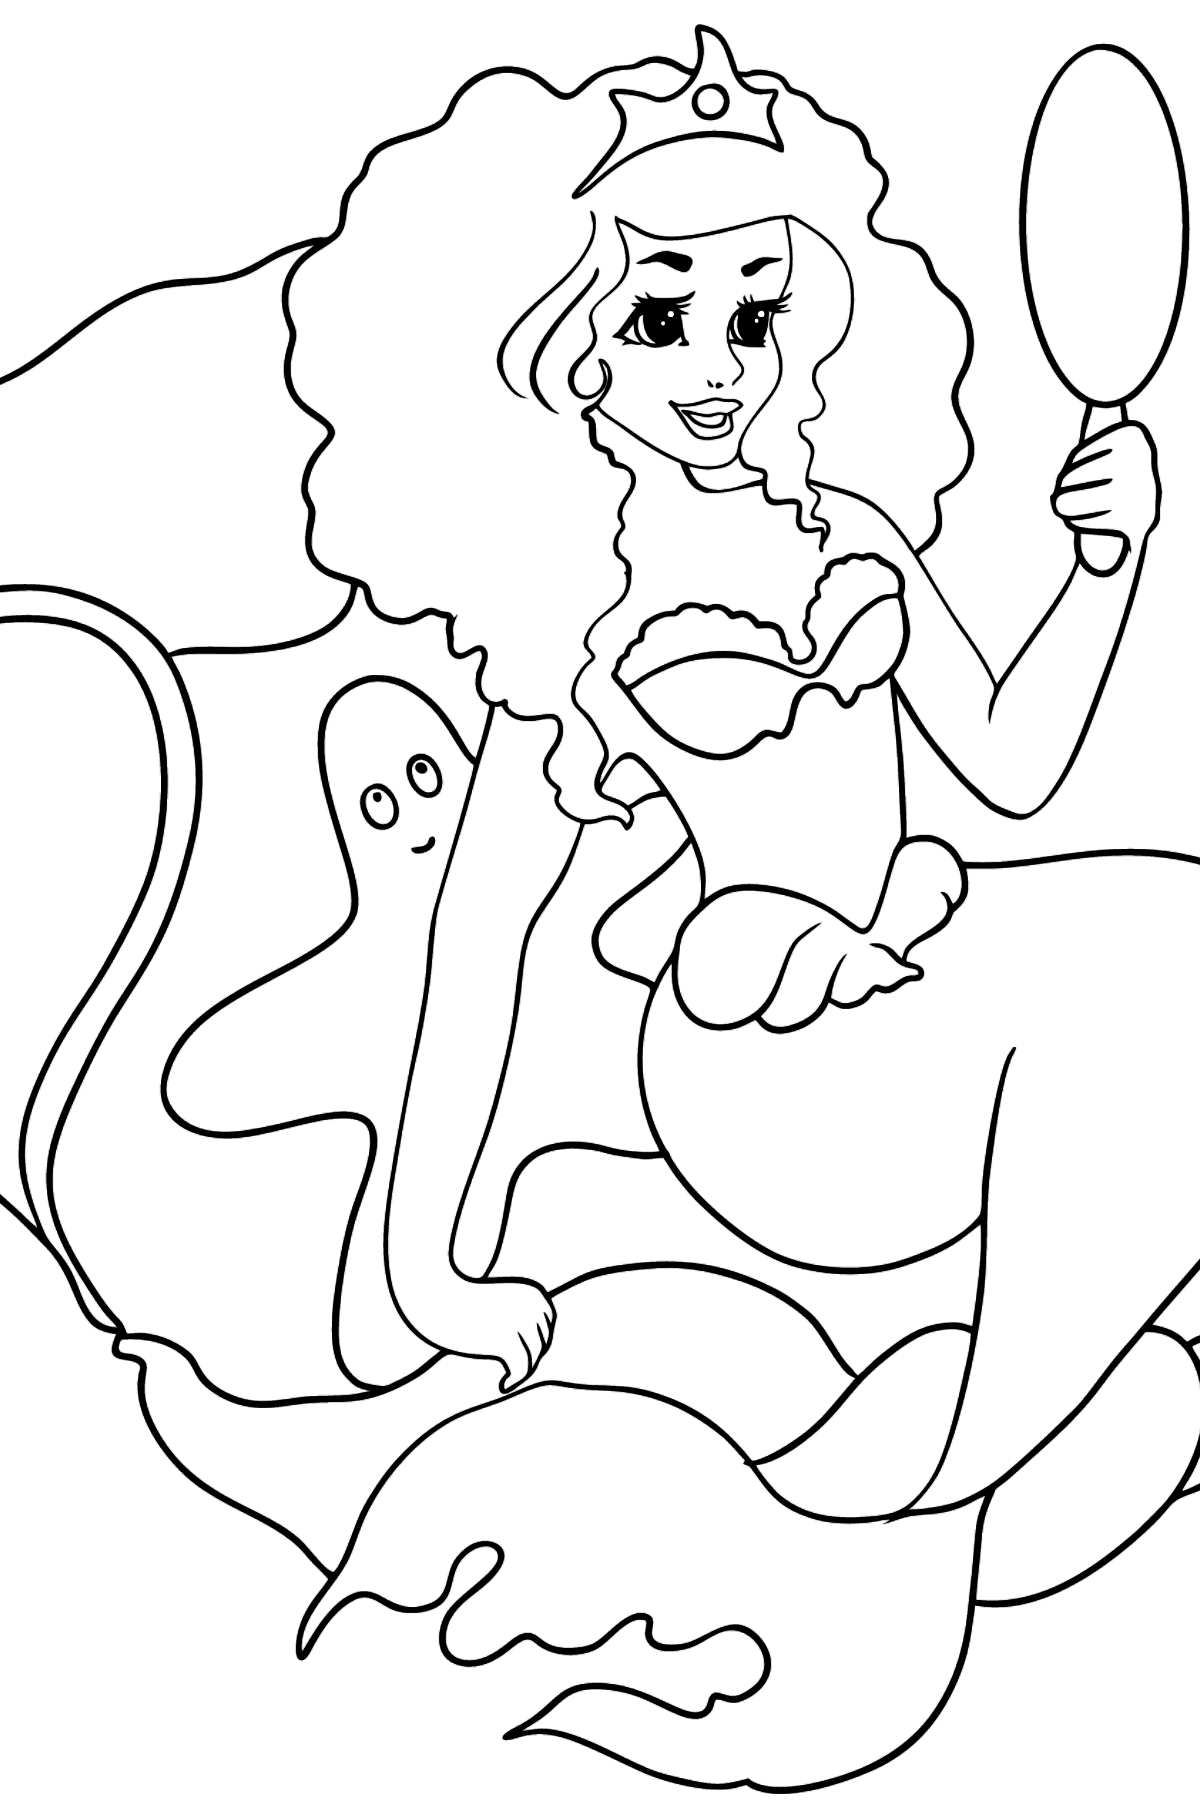 Coloring Page Mermaid with crown - Coloring Pages for Kids